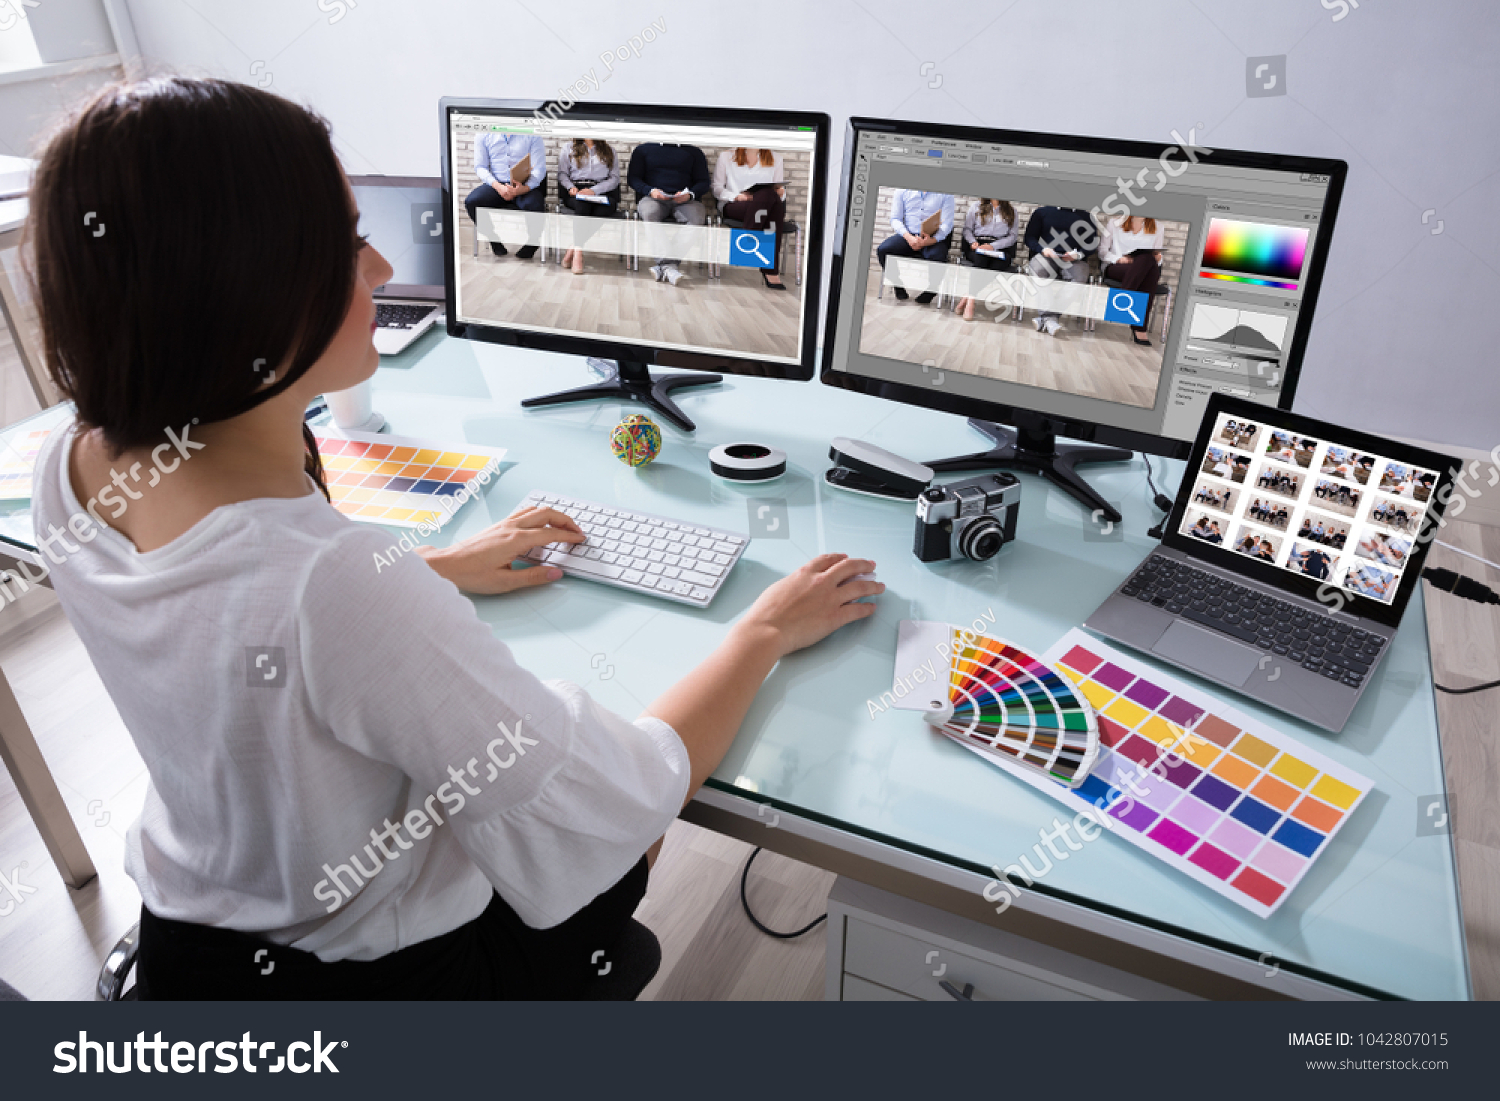 Close-up Of A Female Designer Working On Multiple Computer At Workplace #1042807015